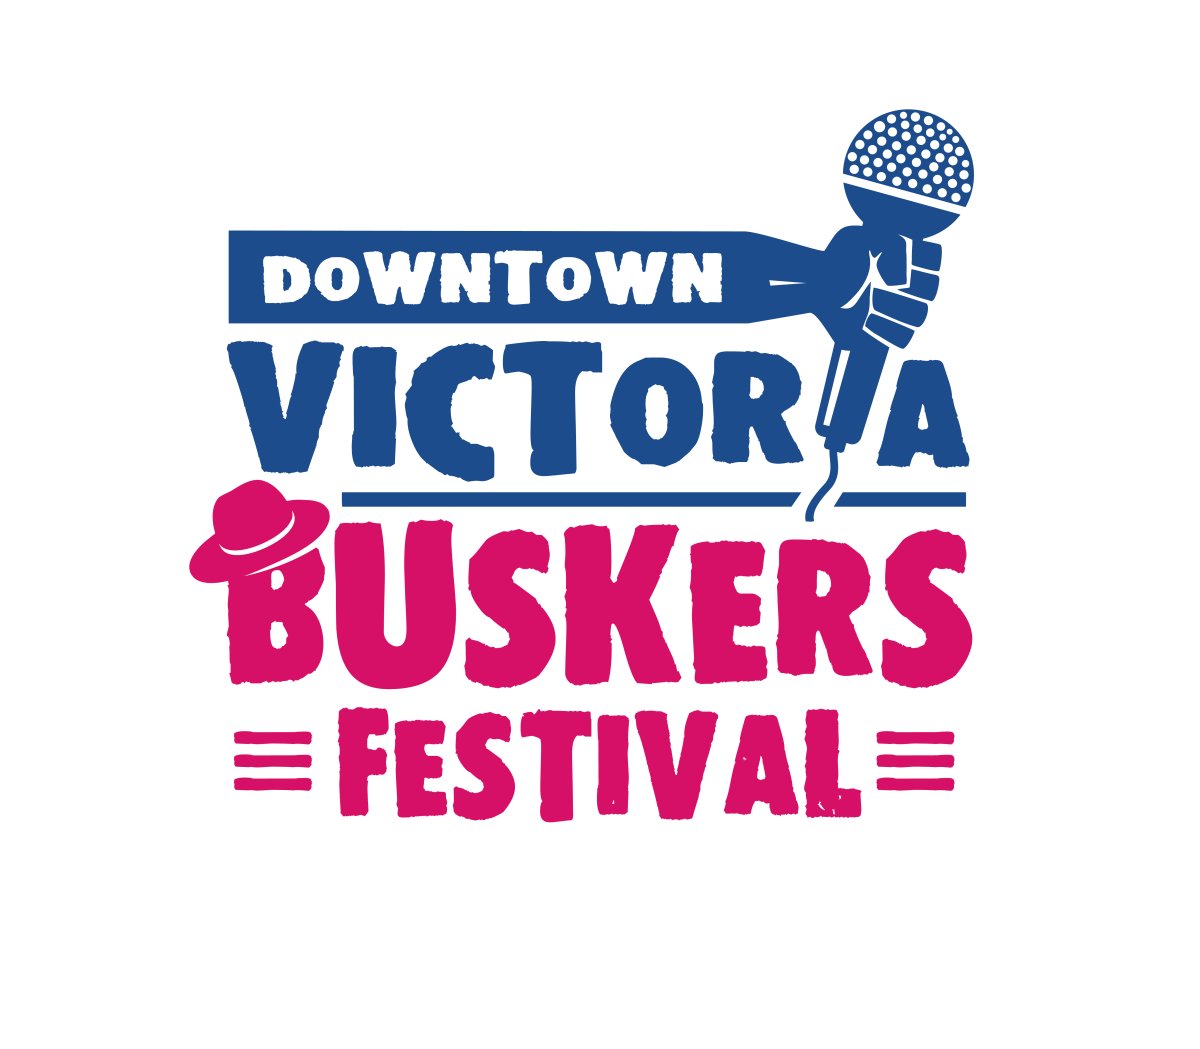 Downtown Victoria Buskers Festival - image